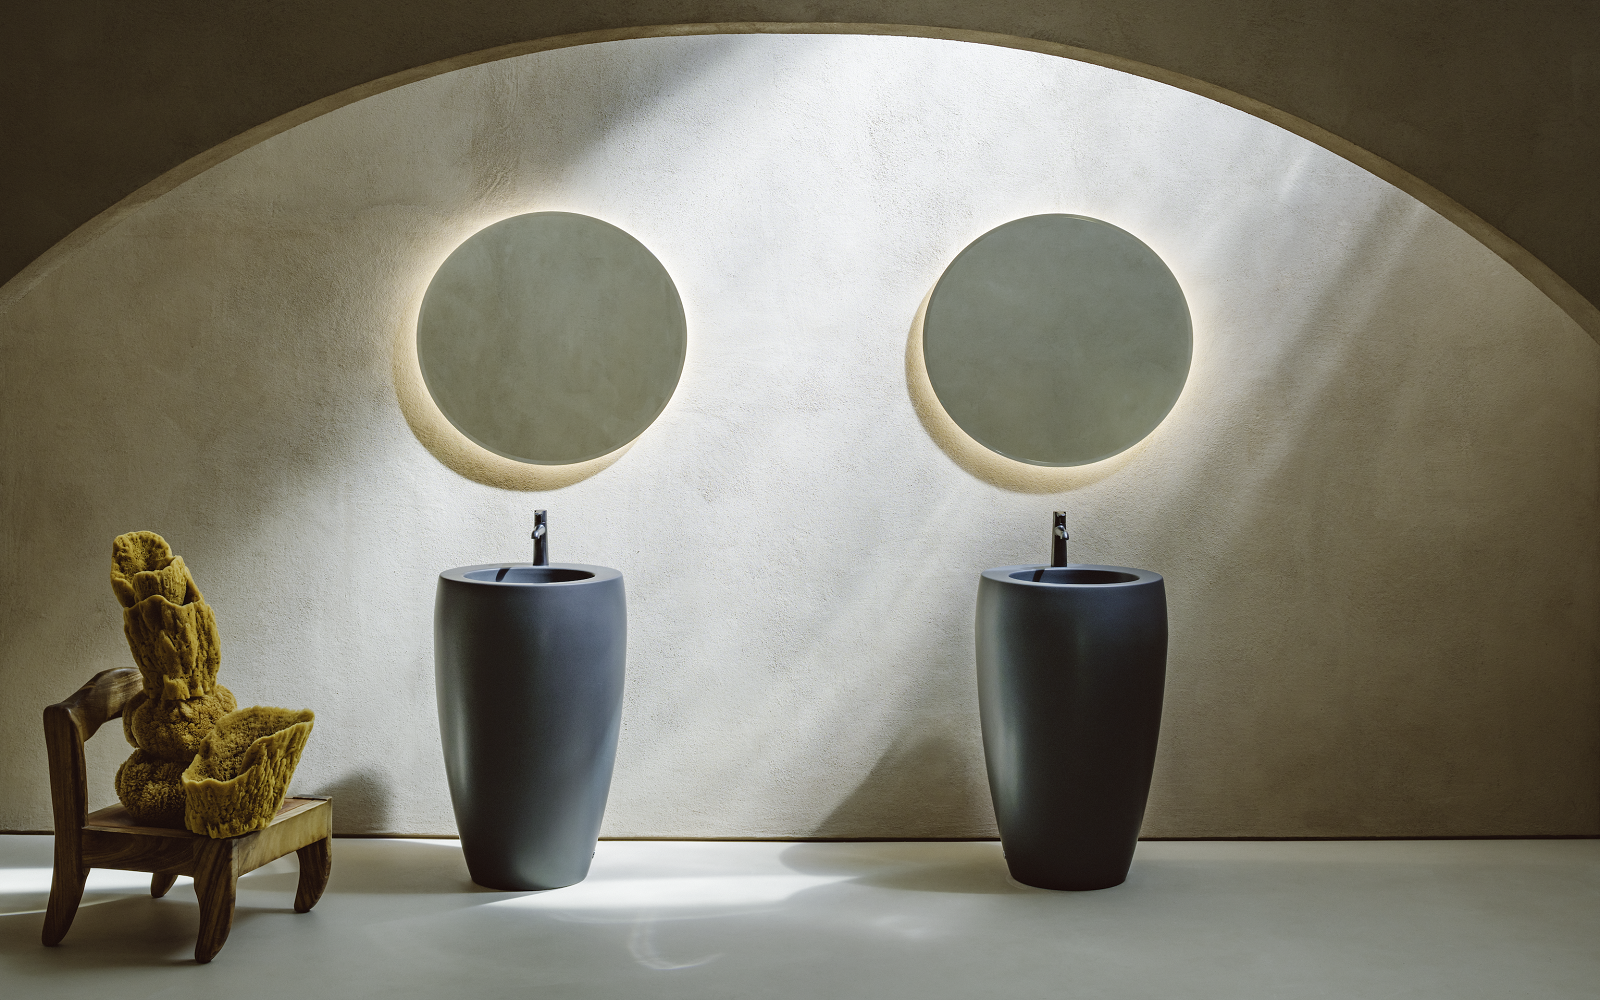 two round wall mirrors above two frreestanding basin units from Laufen